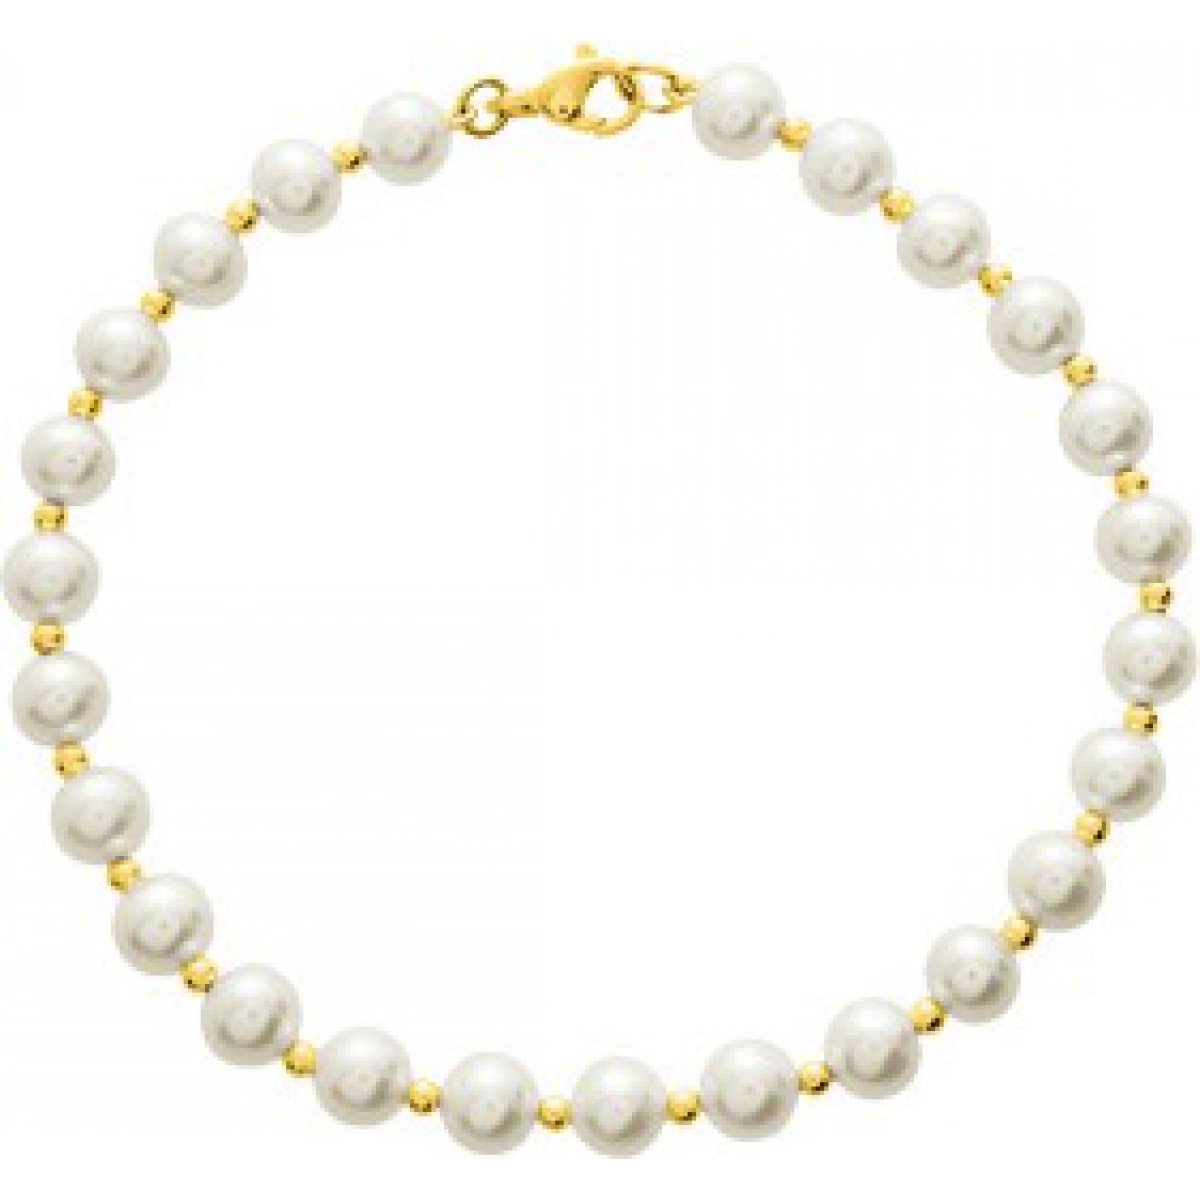 Bracelet w. cult.FWpearl and gold balls 18K YG - Size: 18  Lua Blanca  7803.2P.18